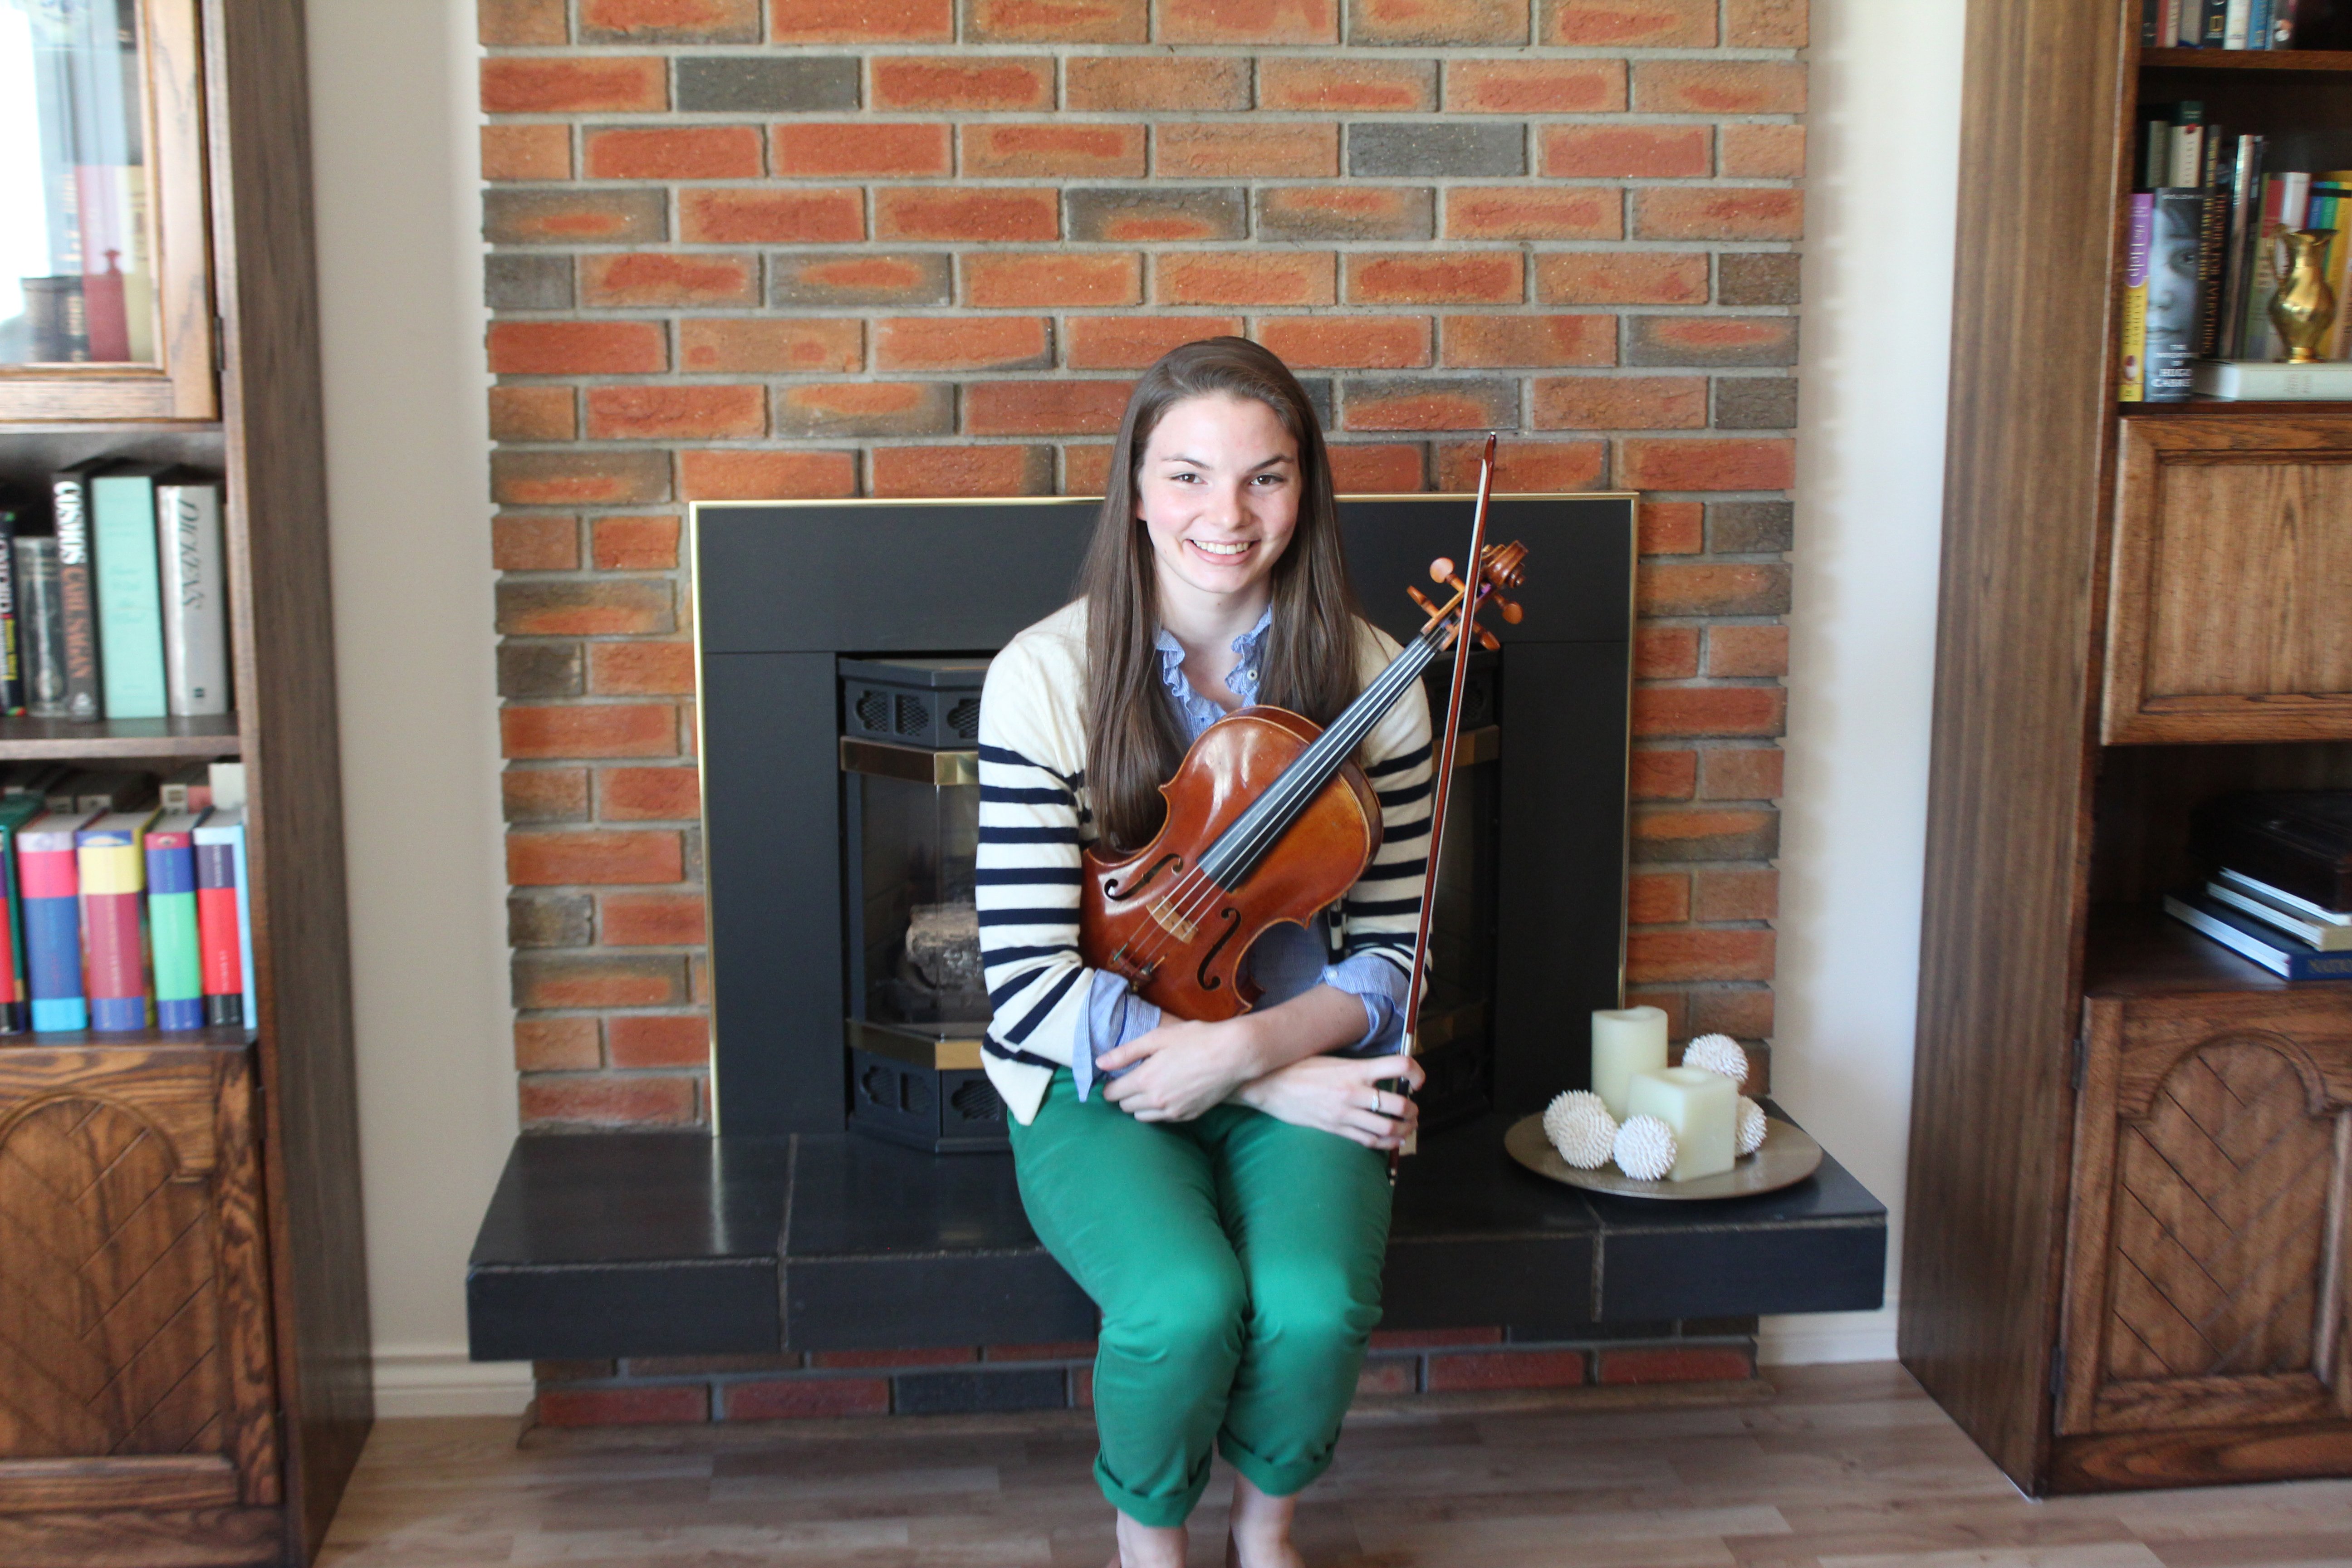 EXCEPTIONAL TALENT – Stephanie Galipeau of Red Deer is off the New York City’s famed Juilliard School this fall. She will continue her viola studies there after wrapping up a diploma in music in Victoria this past spring.